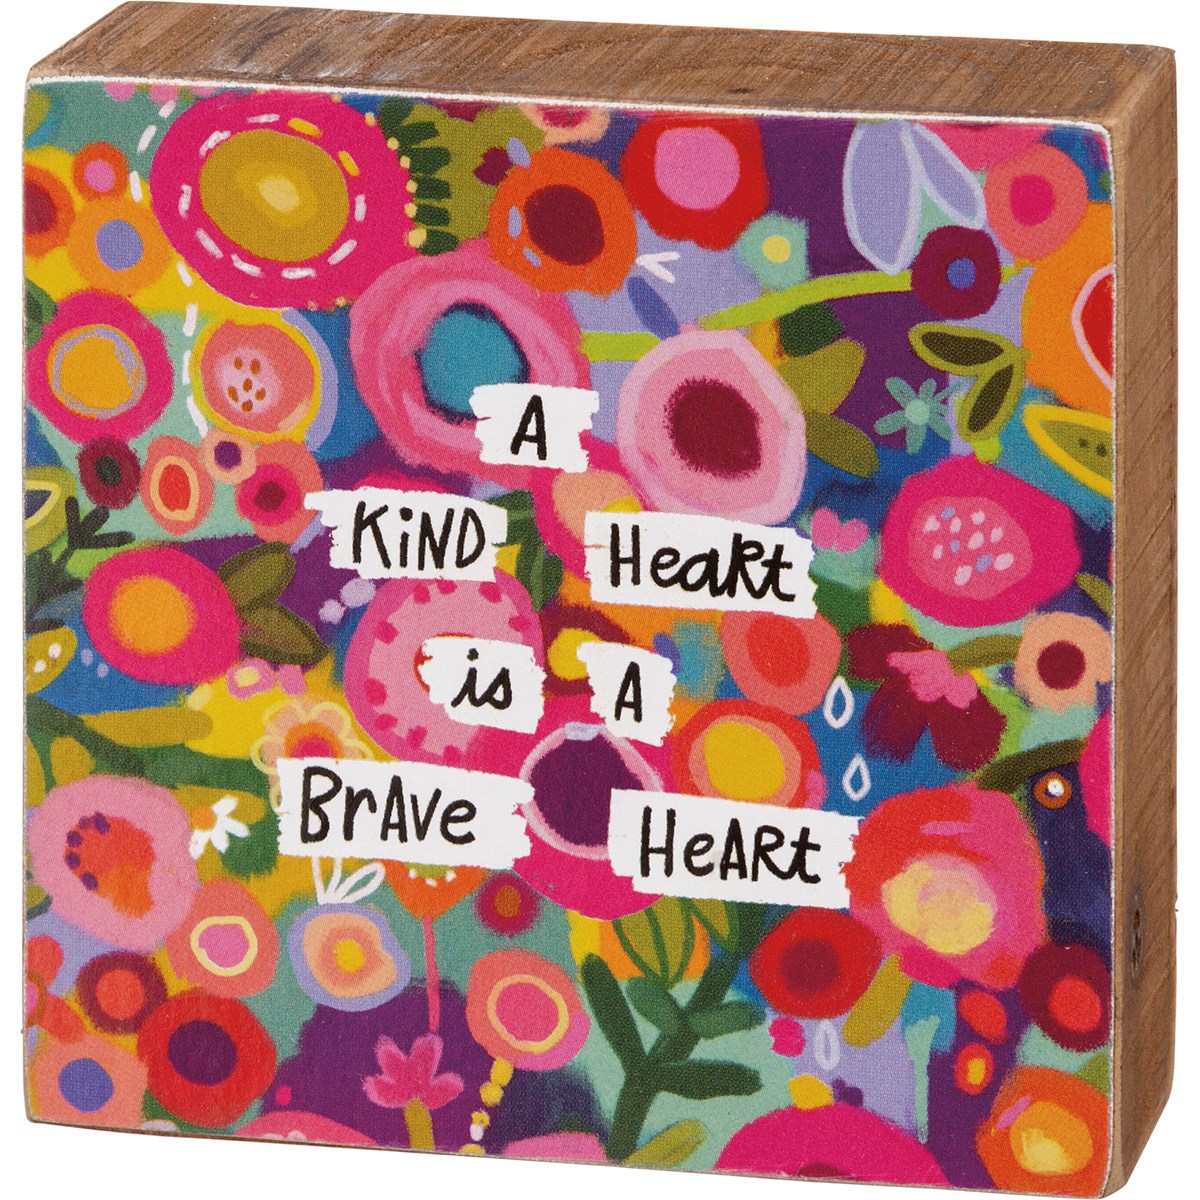 Block Sign - A Kind Heart Is A Brave Heart - 3" x 3" x 1" - Wood, Paper